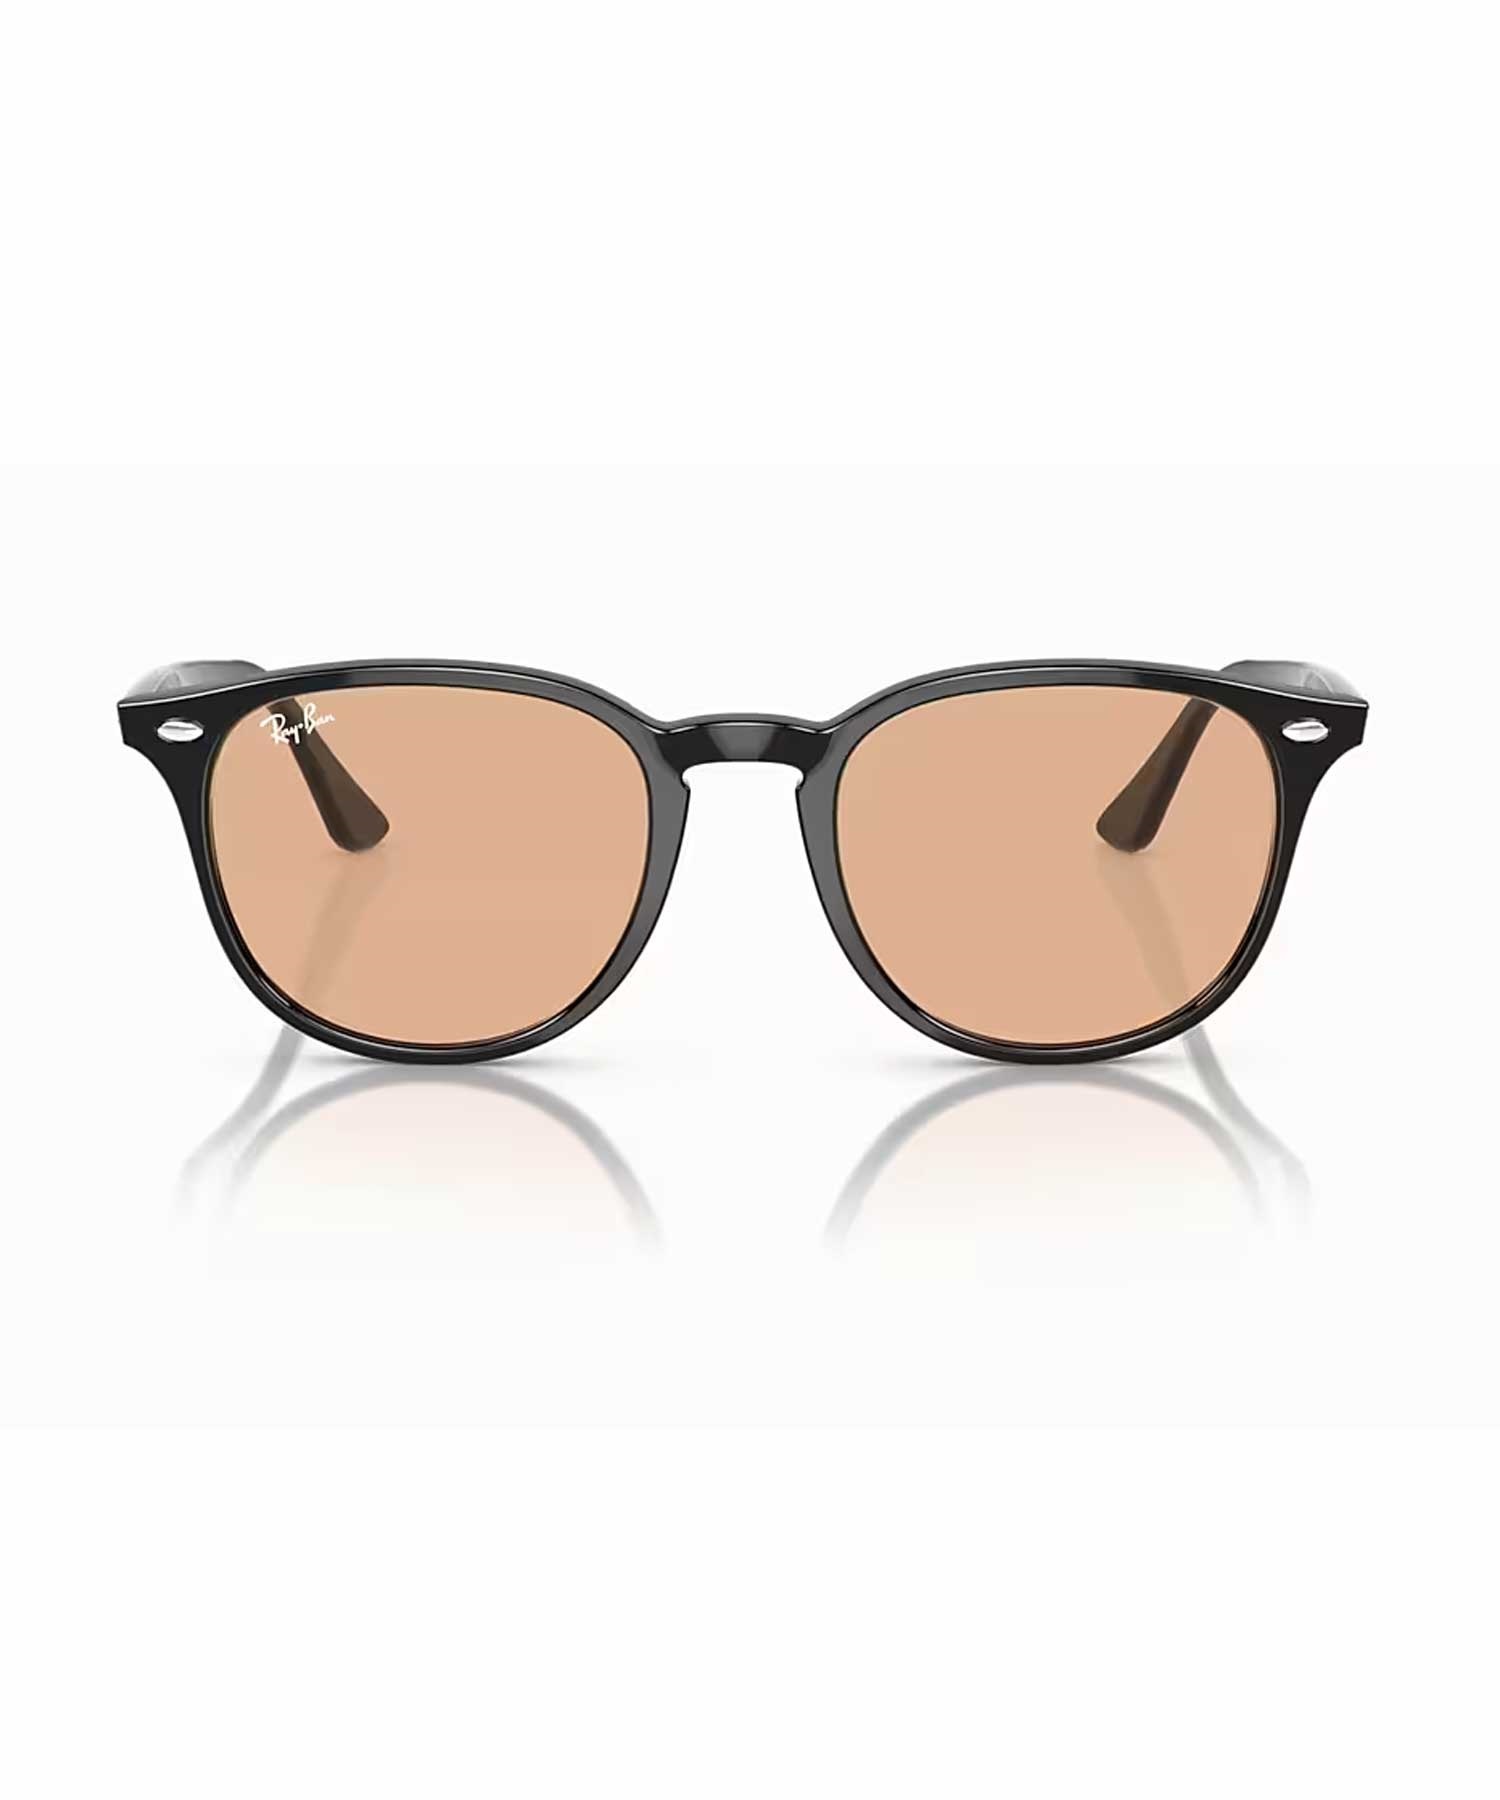 Ray-Ban/レイバン サングラス HIGHSTREET WASHED LENSES 0RB4259F(60193-53cm)